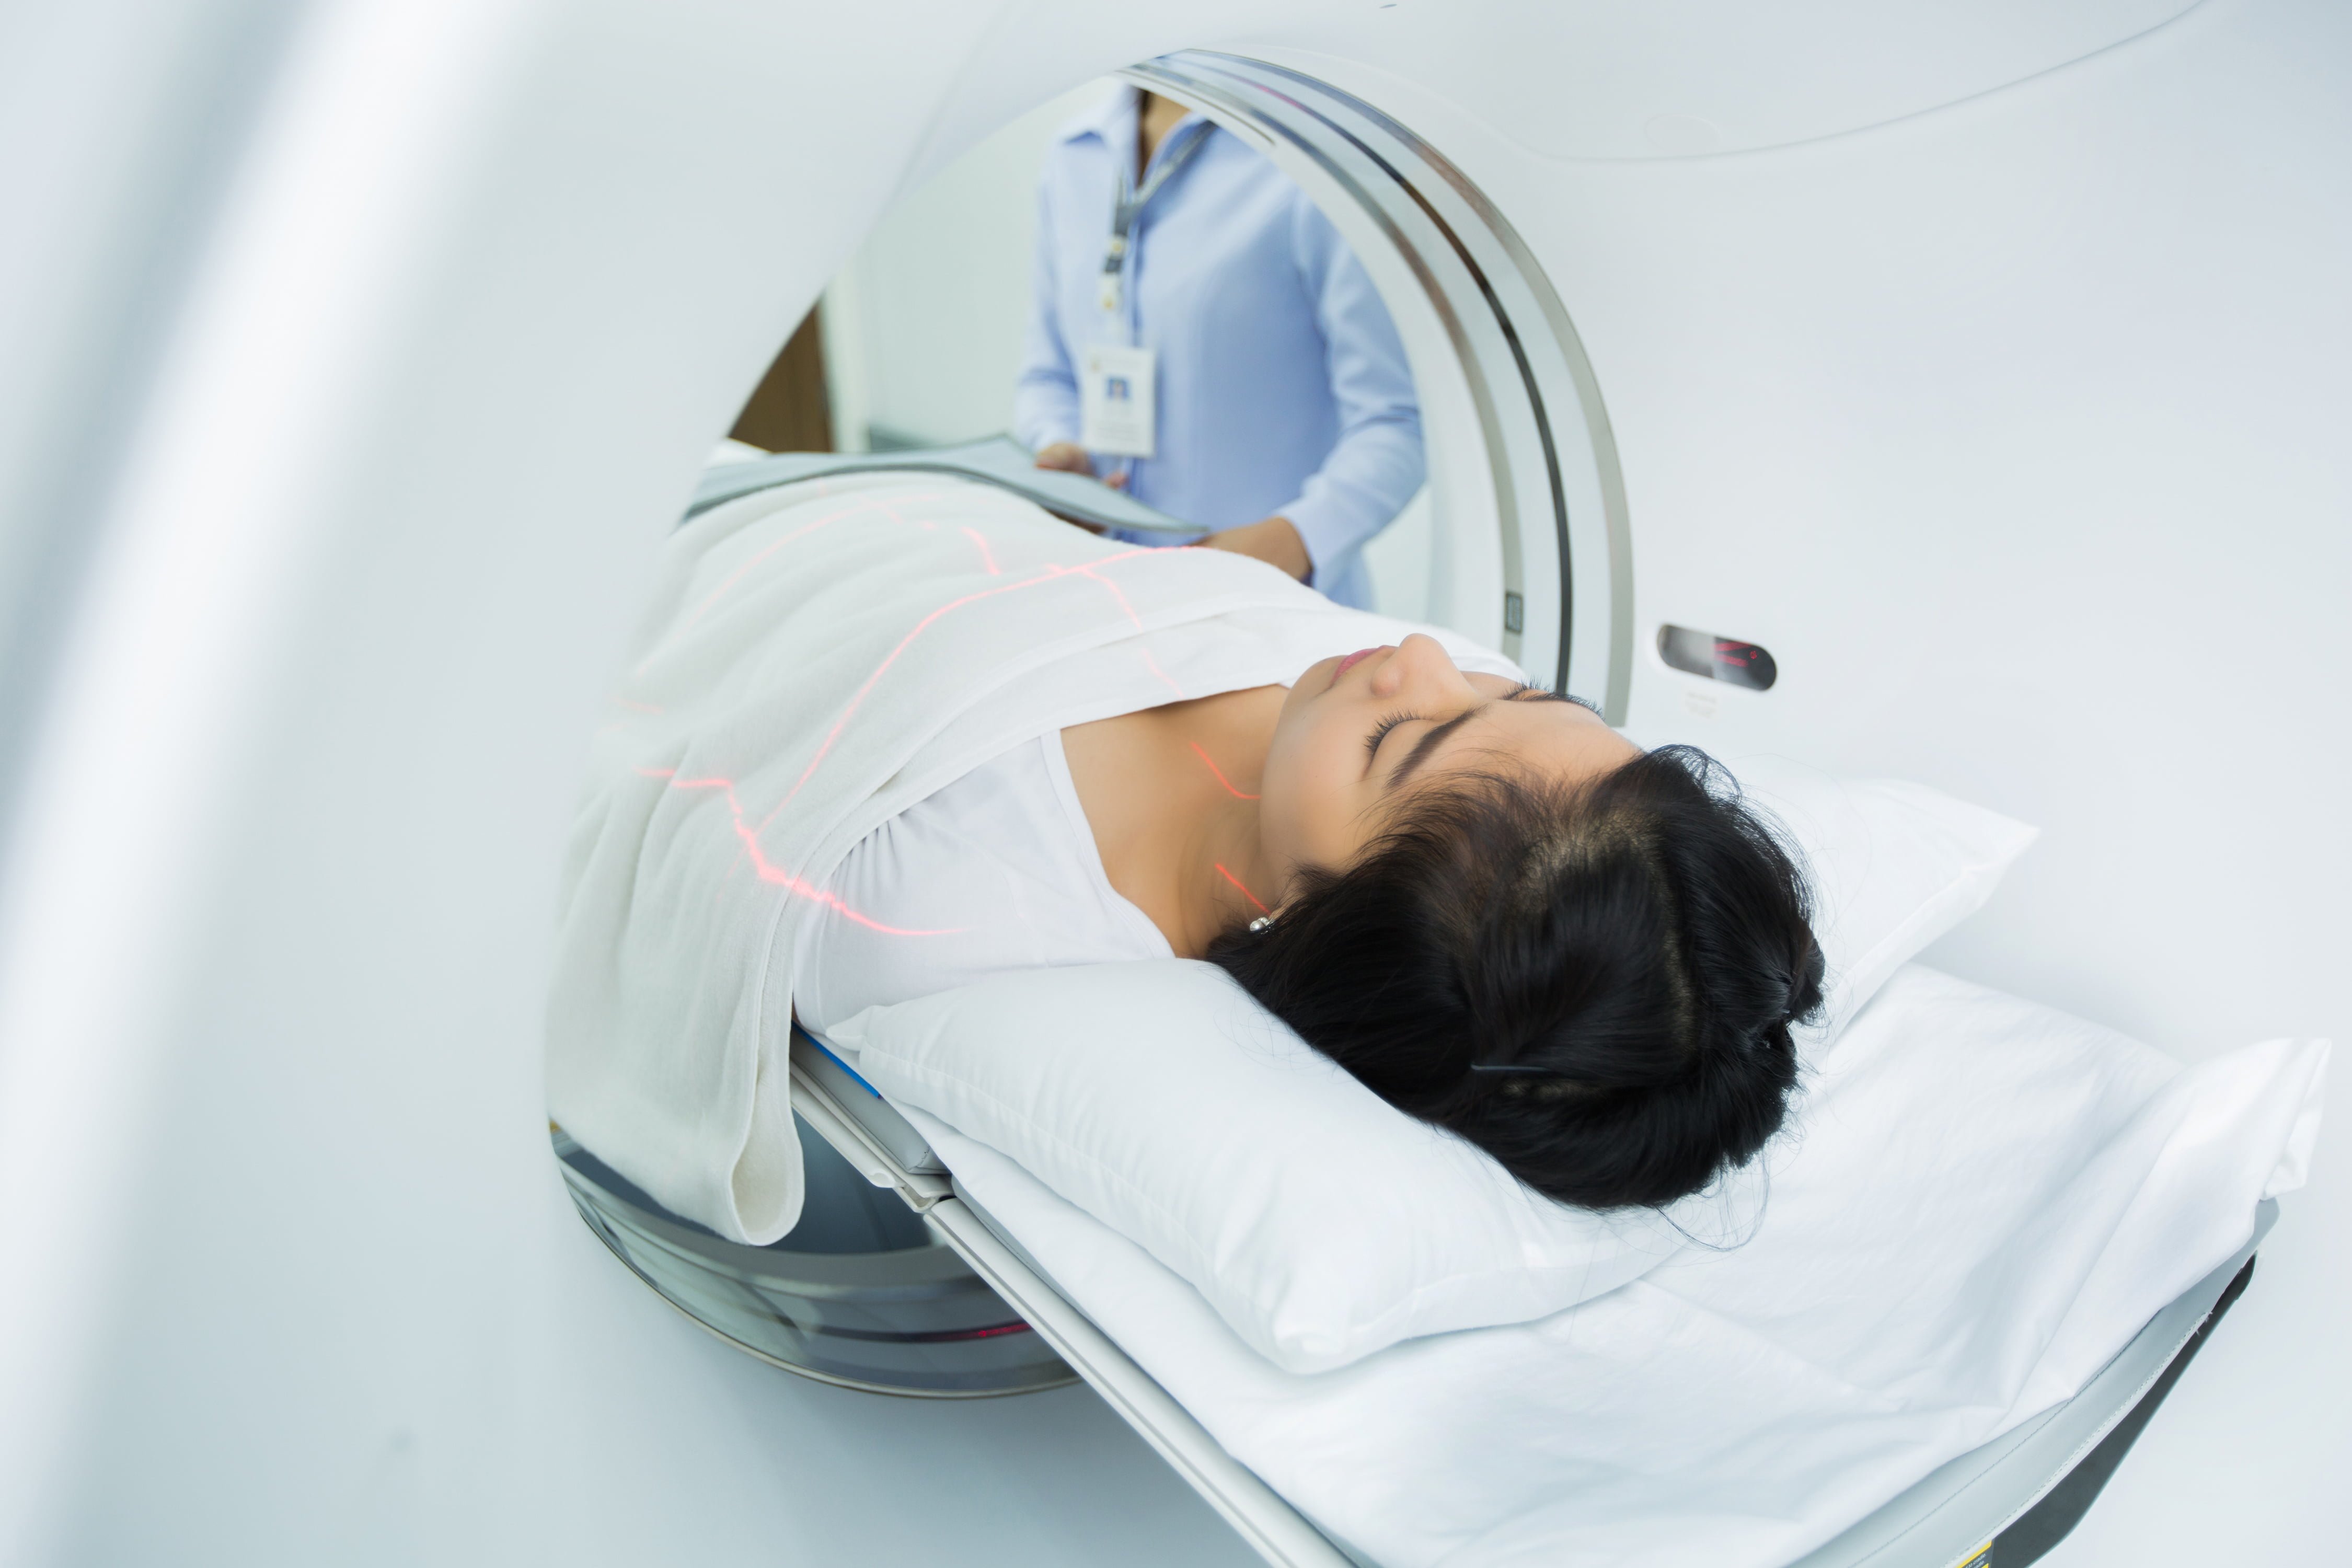 How to Ease Your Nerves When Getting CT Scan or MRI - Revere Health